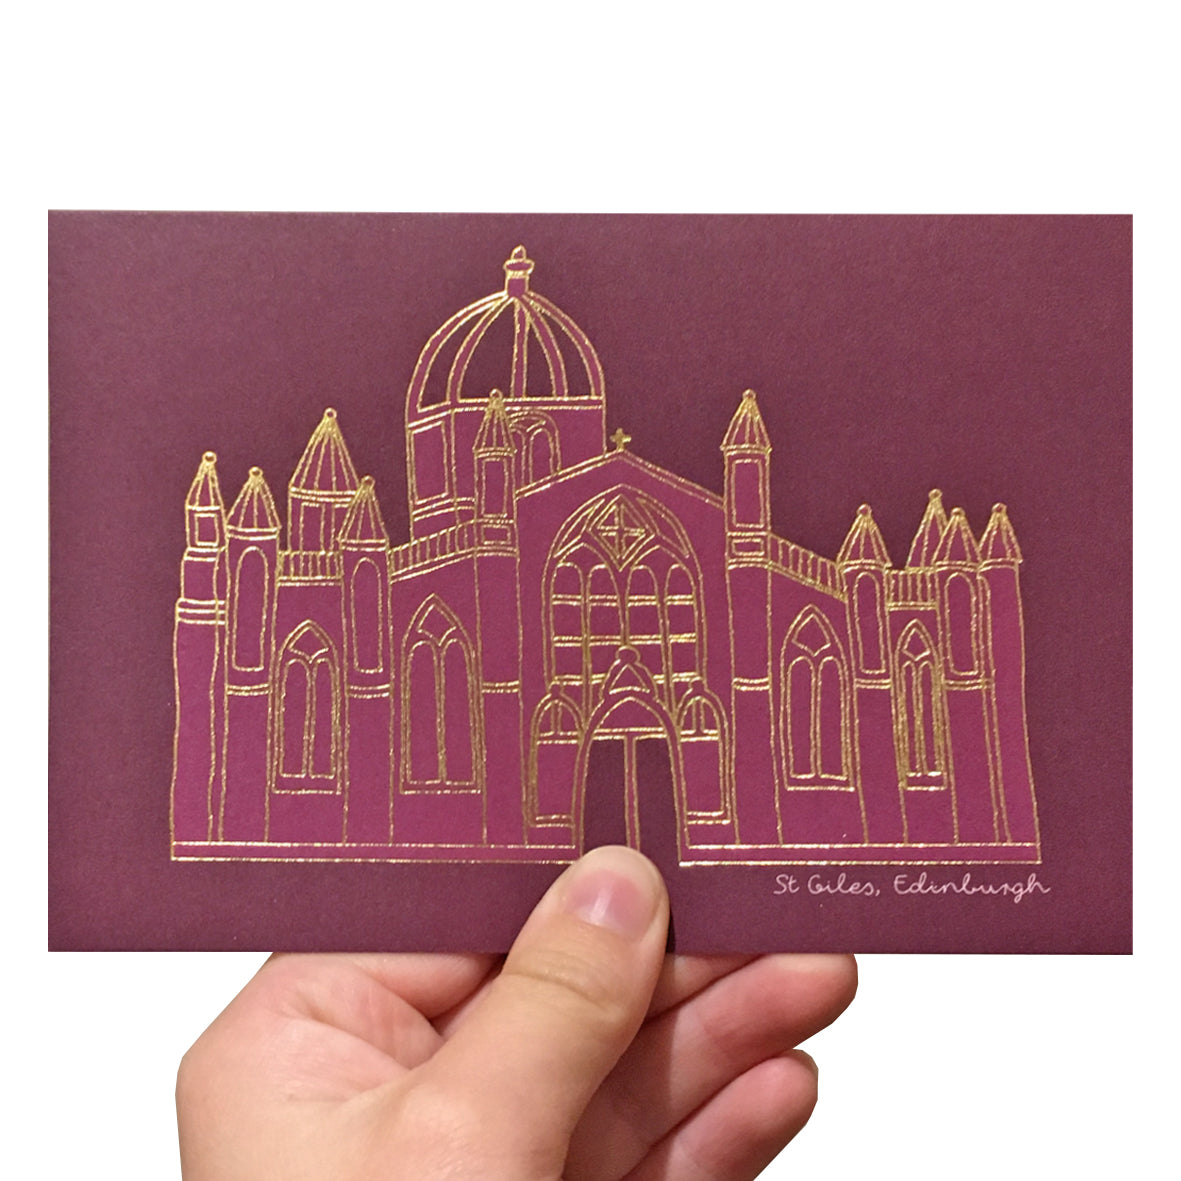 Purple greetings card with a gold foil illustration of St Giles church